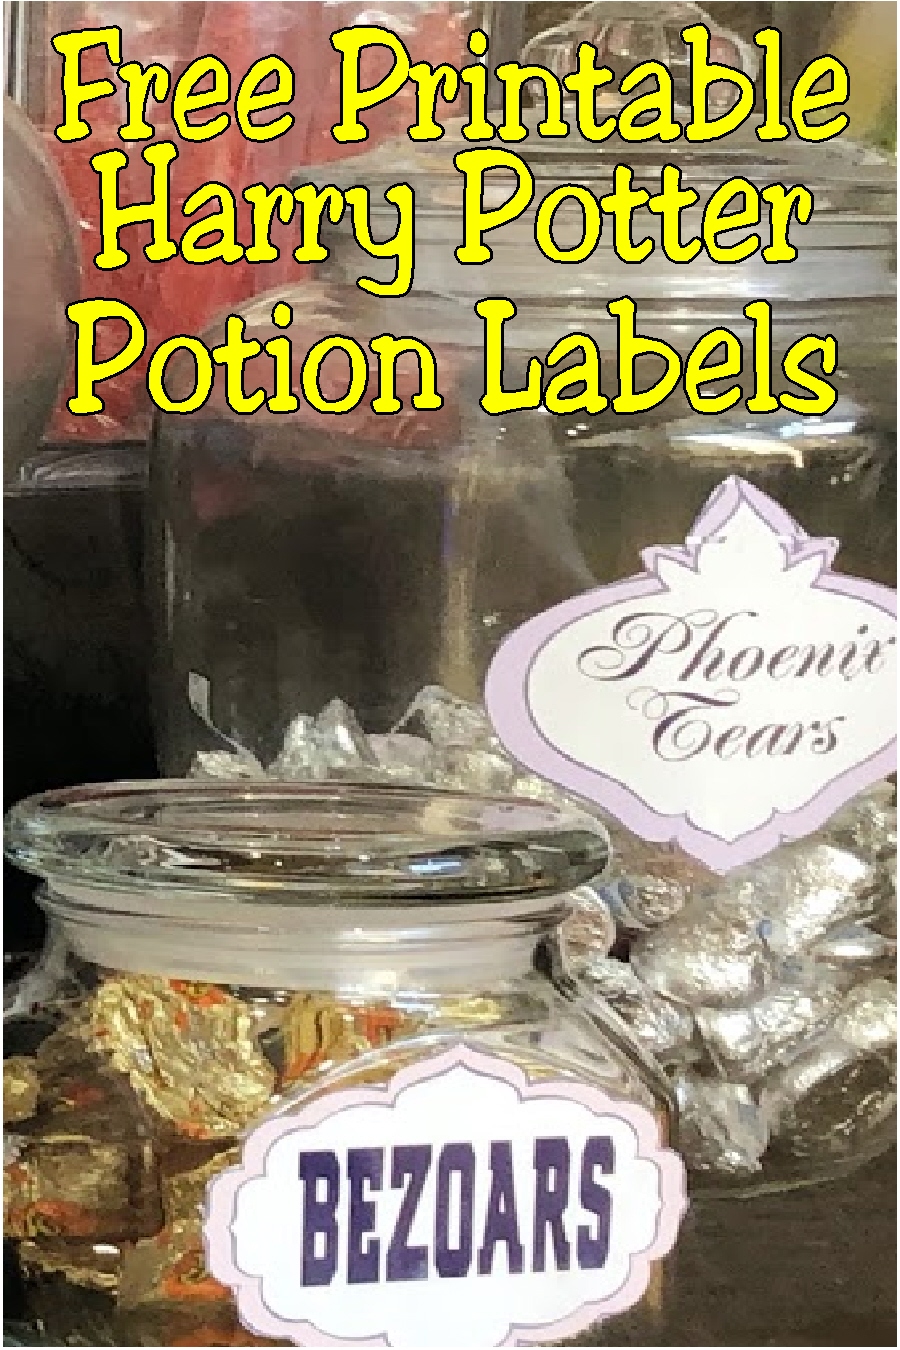 23-candy-potion-ideas-and-harry-potter-potion-label-printables-diy